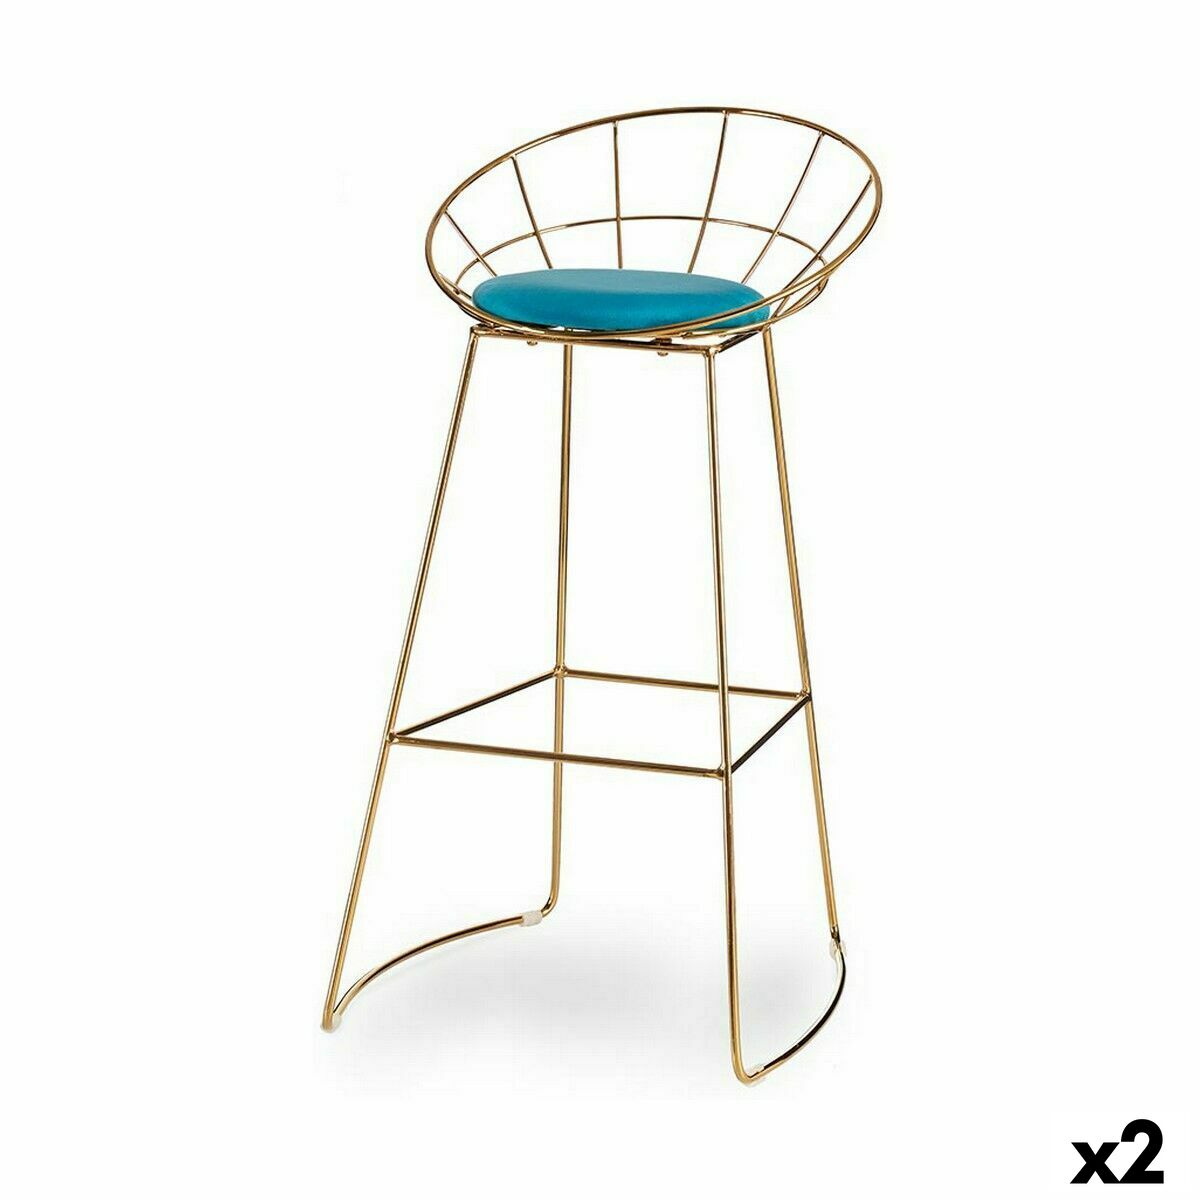 Blue Stool with Golden Metal Frame (51 x 94 x 52 cm) (2 Units)